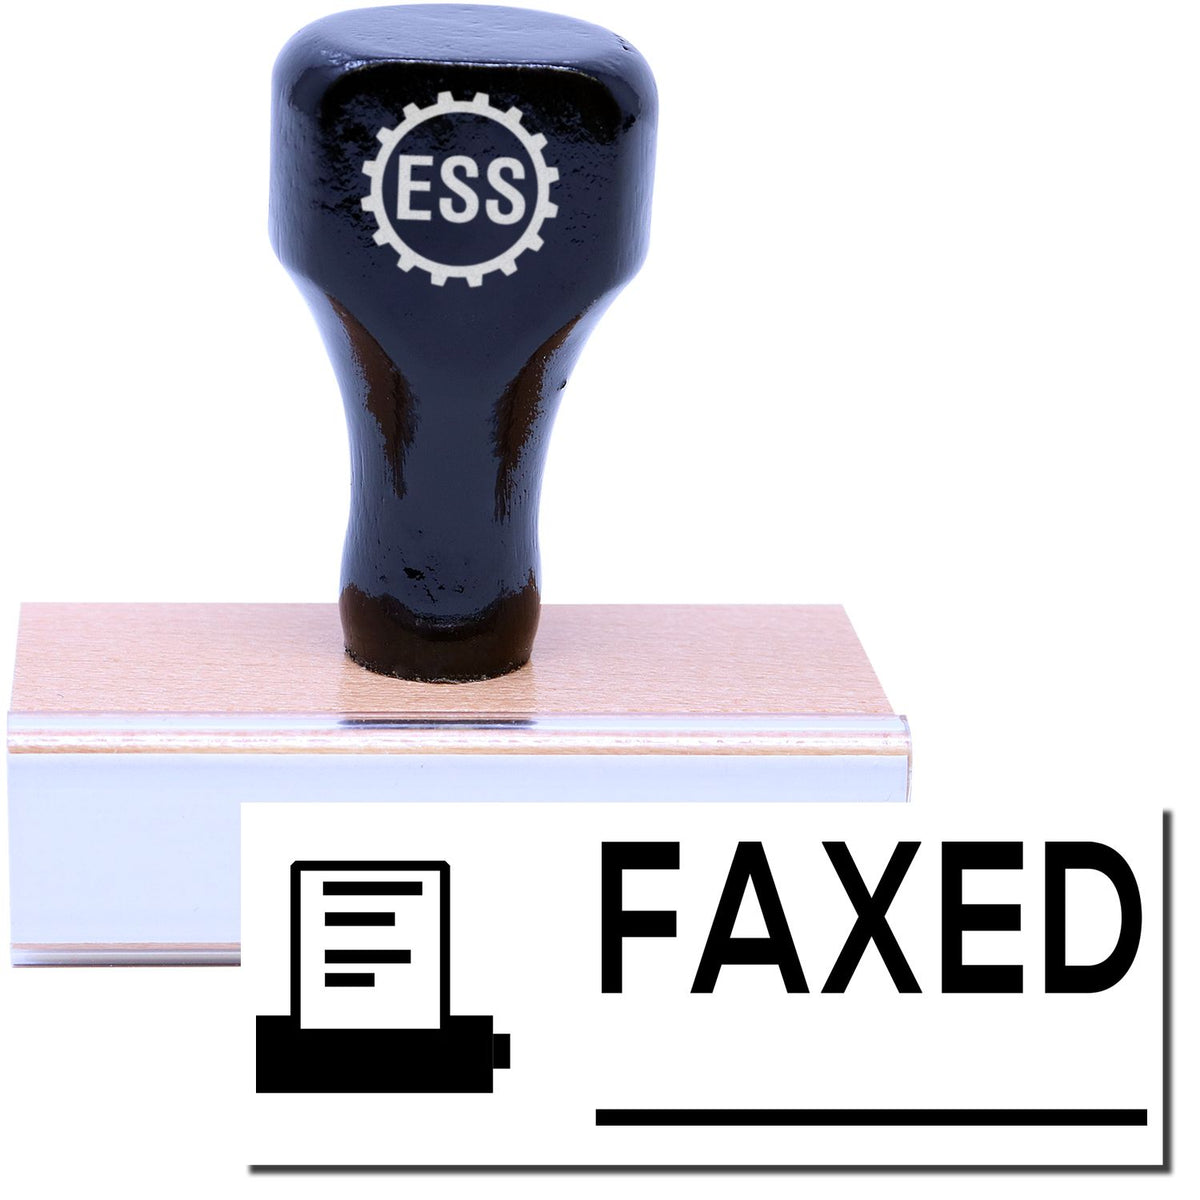 A stock office rubber stamp with a stamped image showing how the text &quot;FAXED&quot; in a large font with a line underneath the text and a small image of a fax machine on the left side is displayed after stamping.